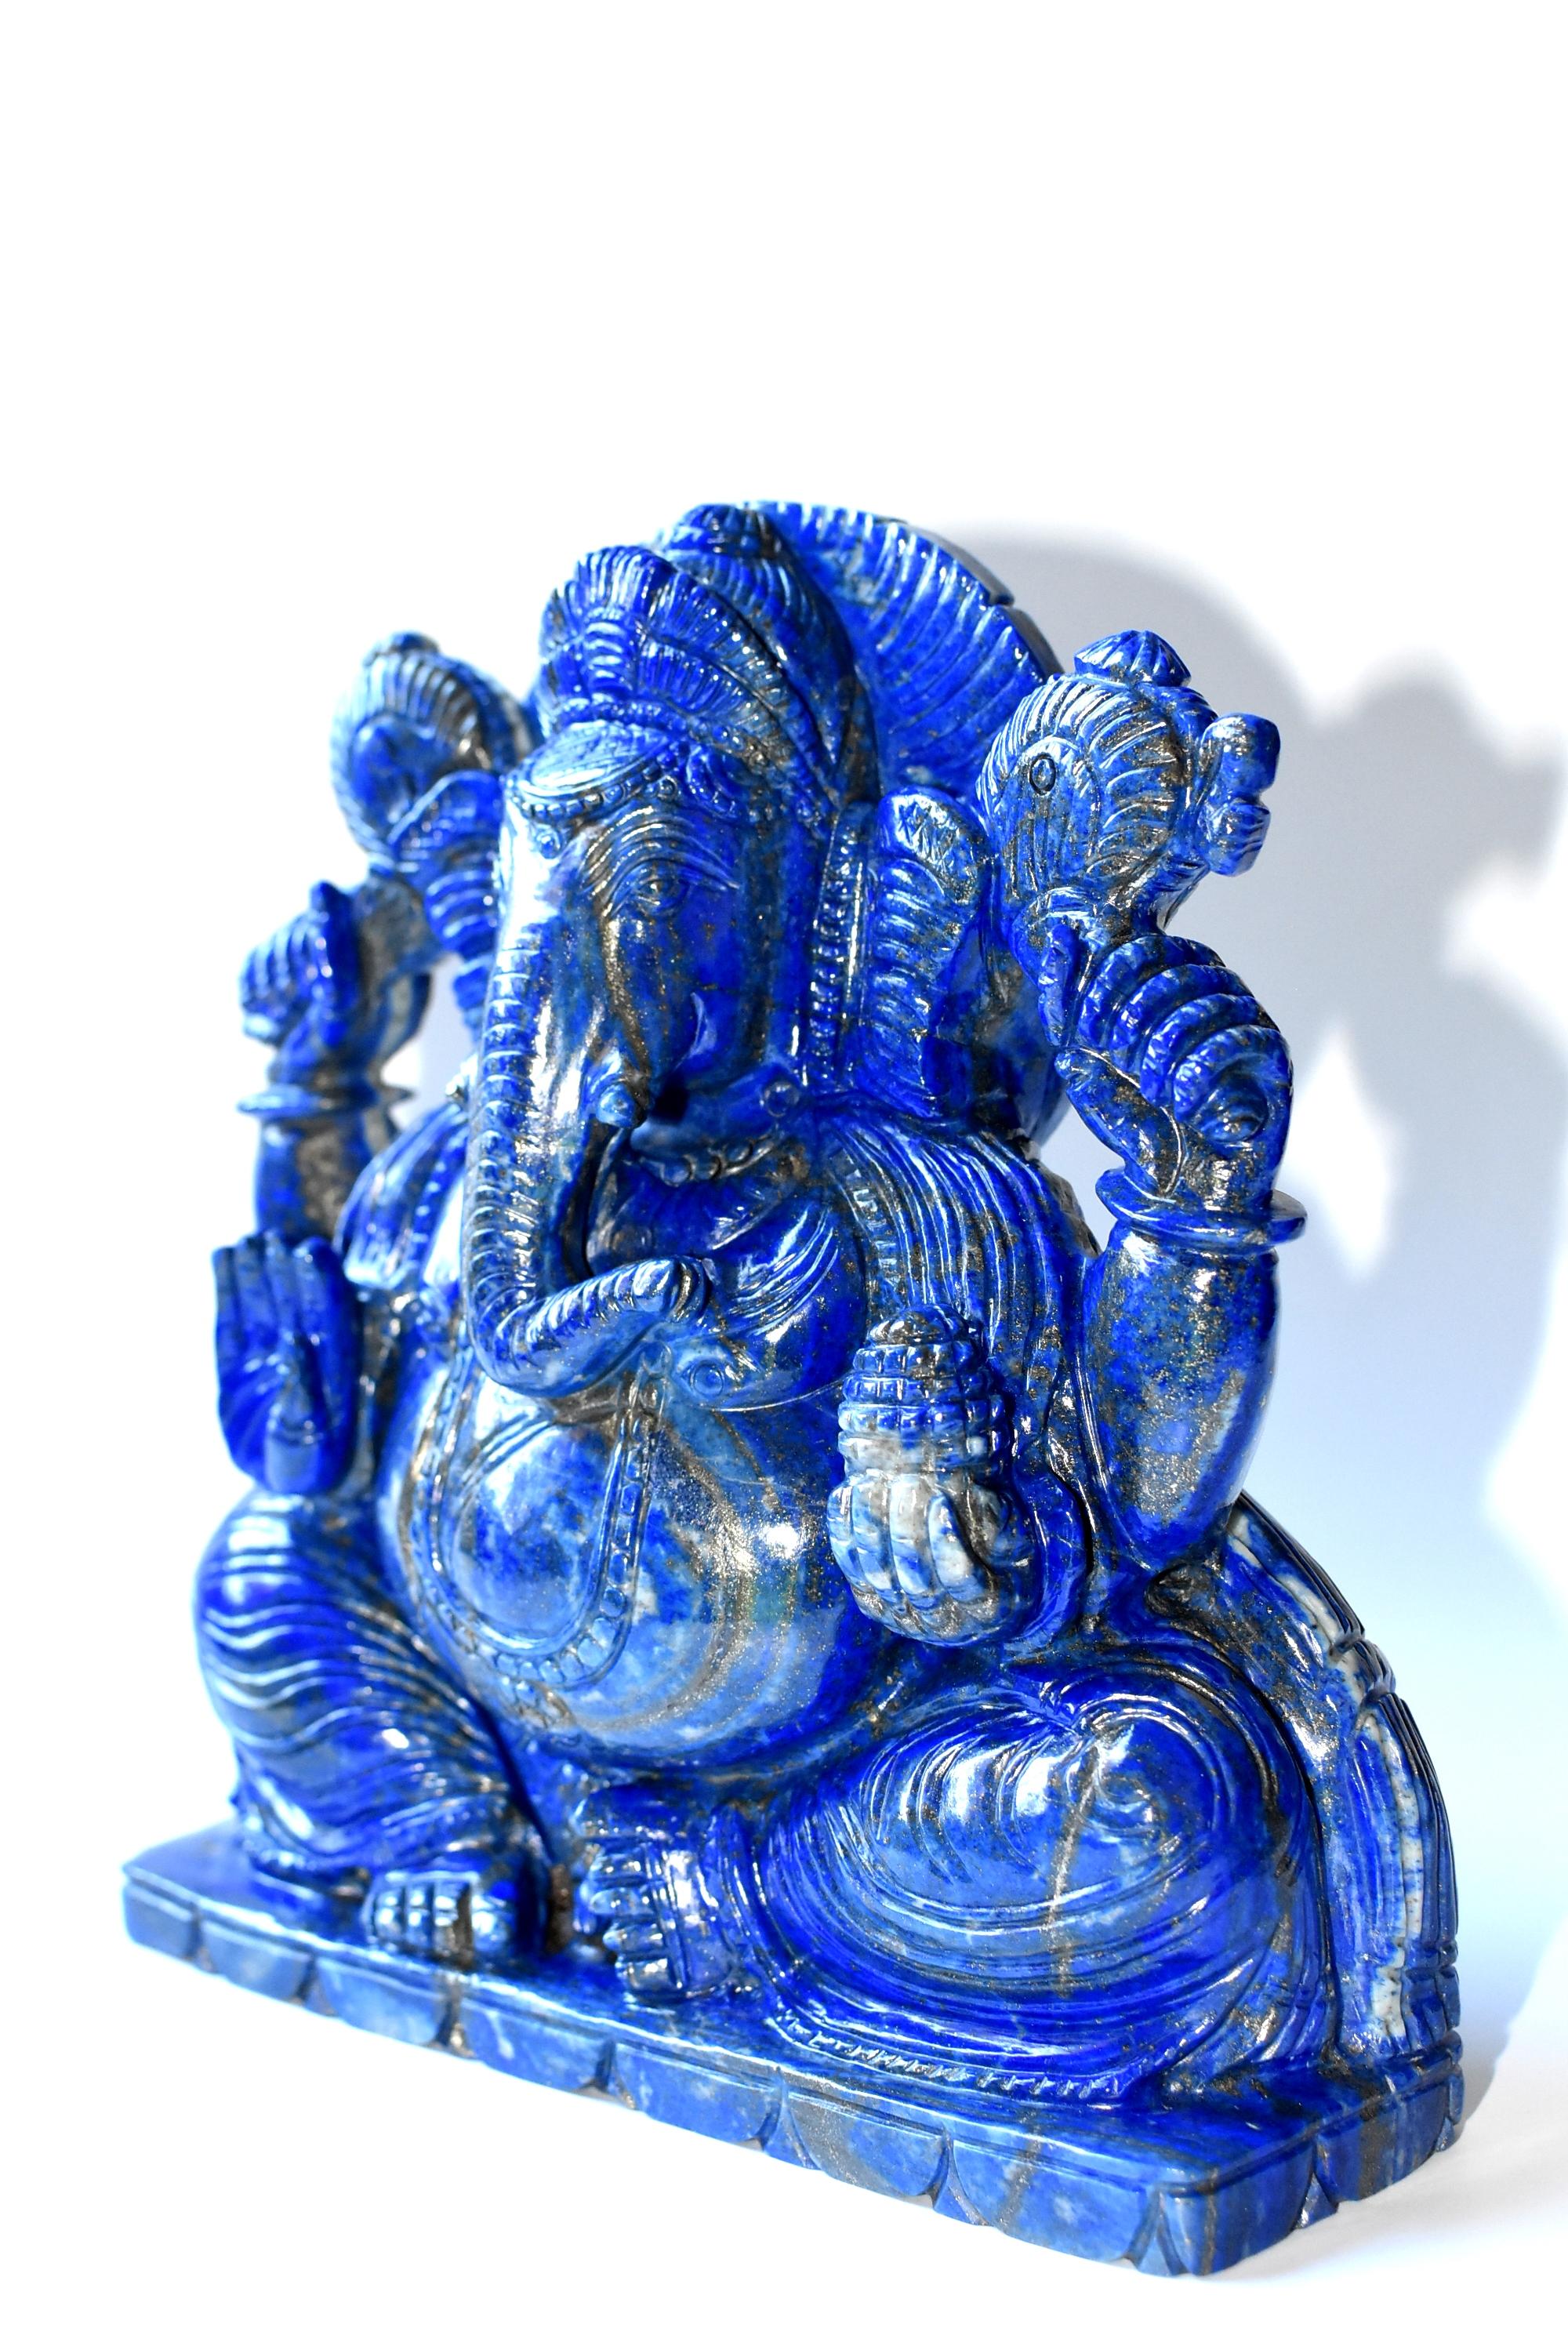 A magnificent, hand carved, large sculpture of Ganesh. The amazing 5.8 lb stone is genuine all natural lapis lazulli of the finest quality. The blue color is the most saturated cobalt blue, with few stripes of gold. Wonderful craftsmanship. Great